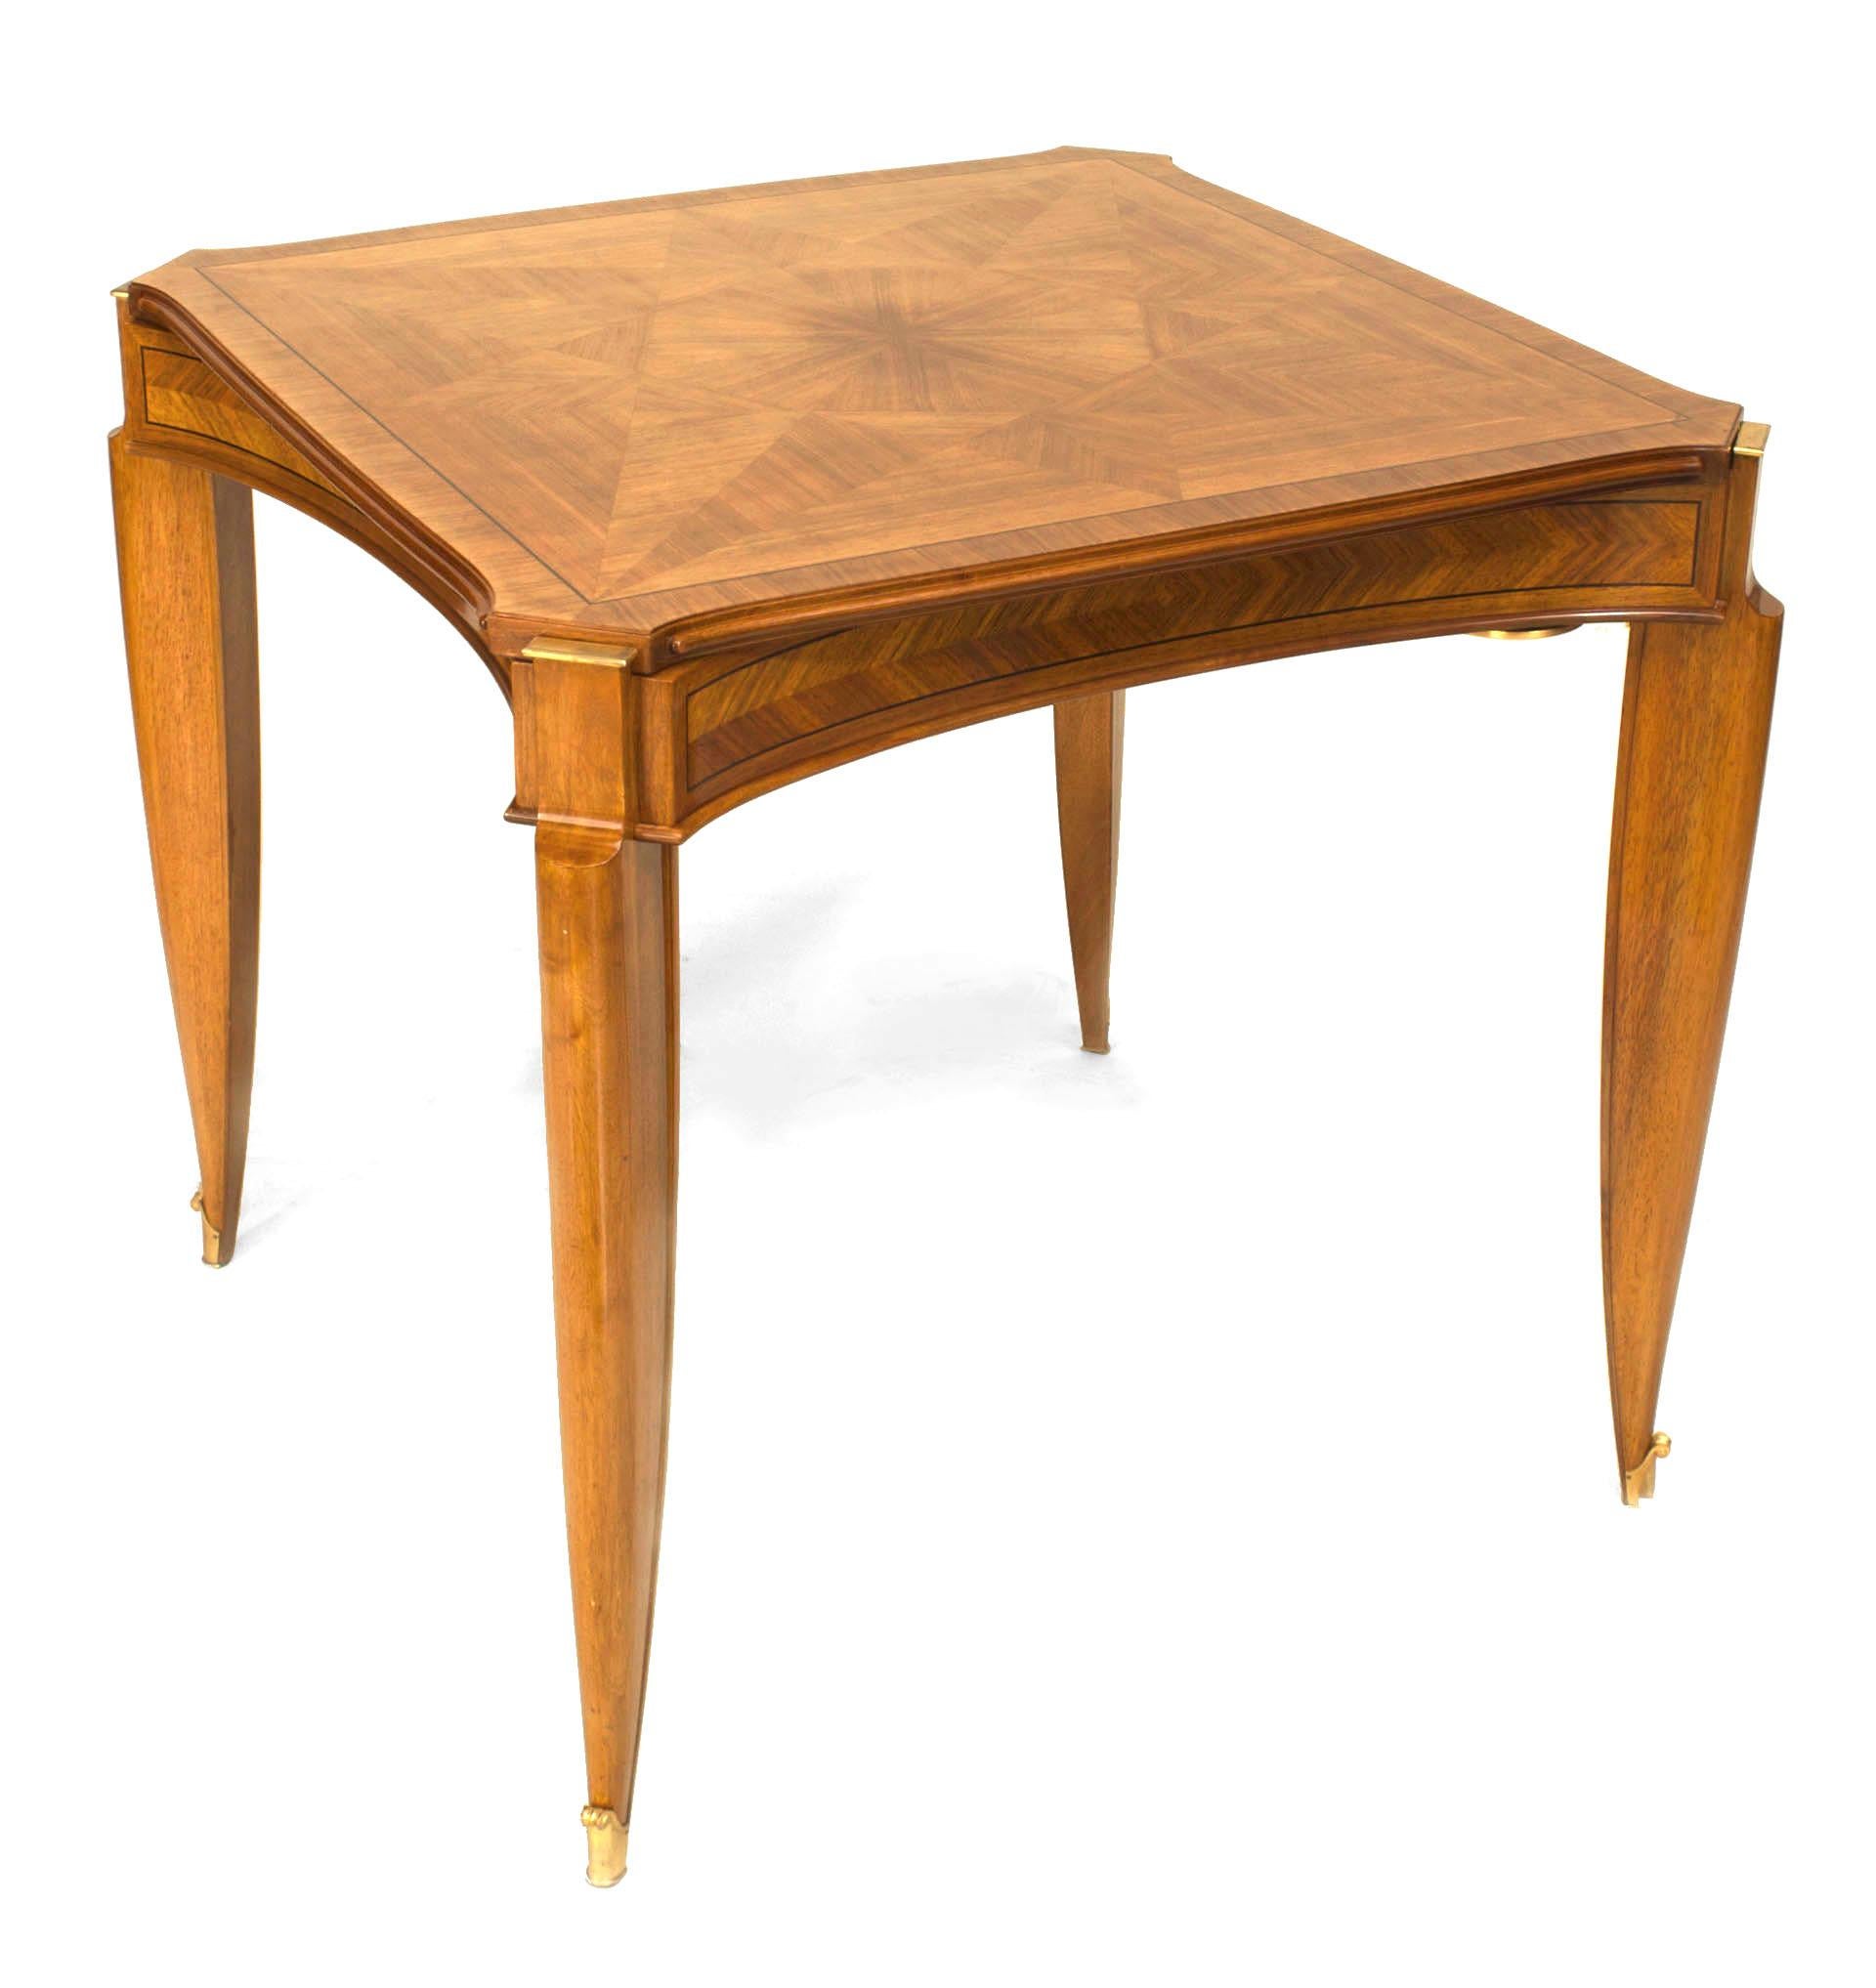 French Art Deco light mahogany square game table with a removable parquetry top & ebonized banded inlay trim over a concave apron with bronze trim & sabot. (JEAN PASCAUD) (Related item: 060628)
